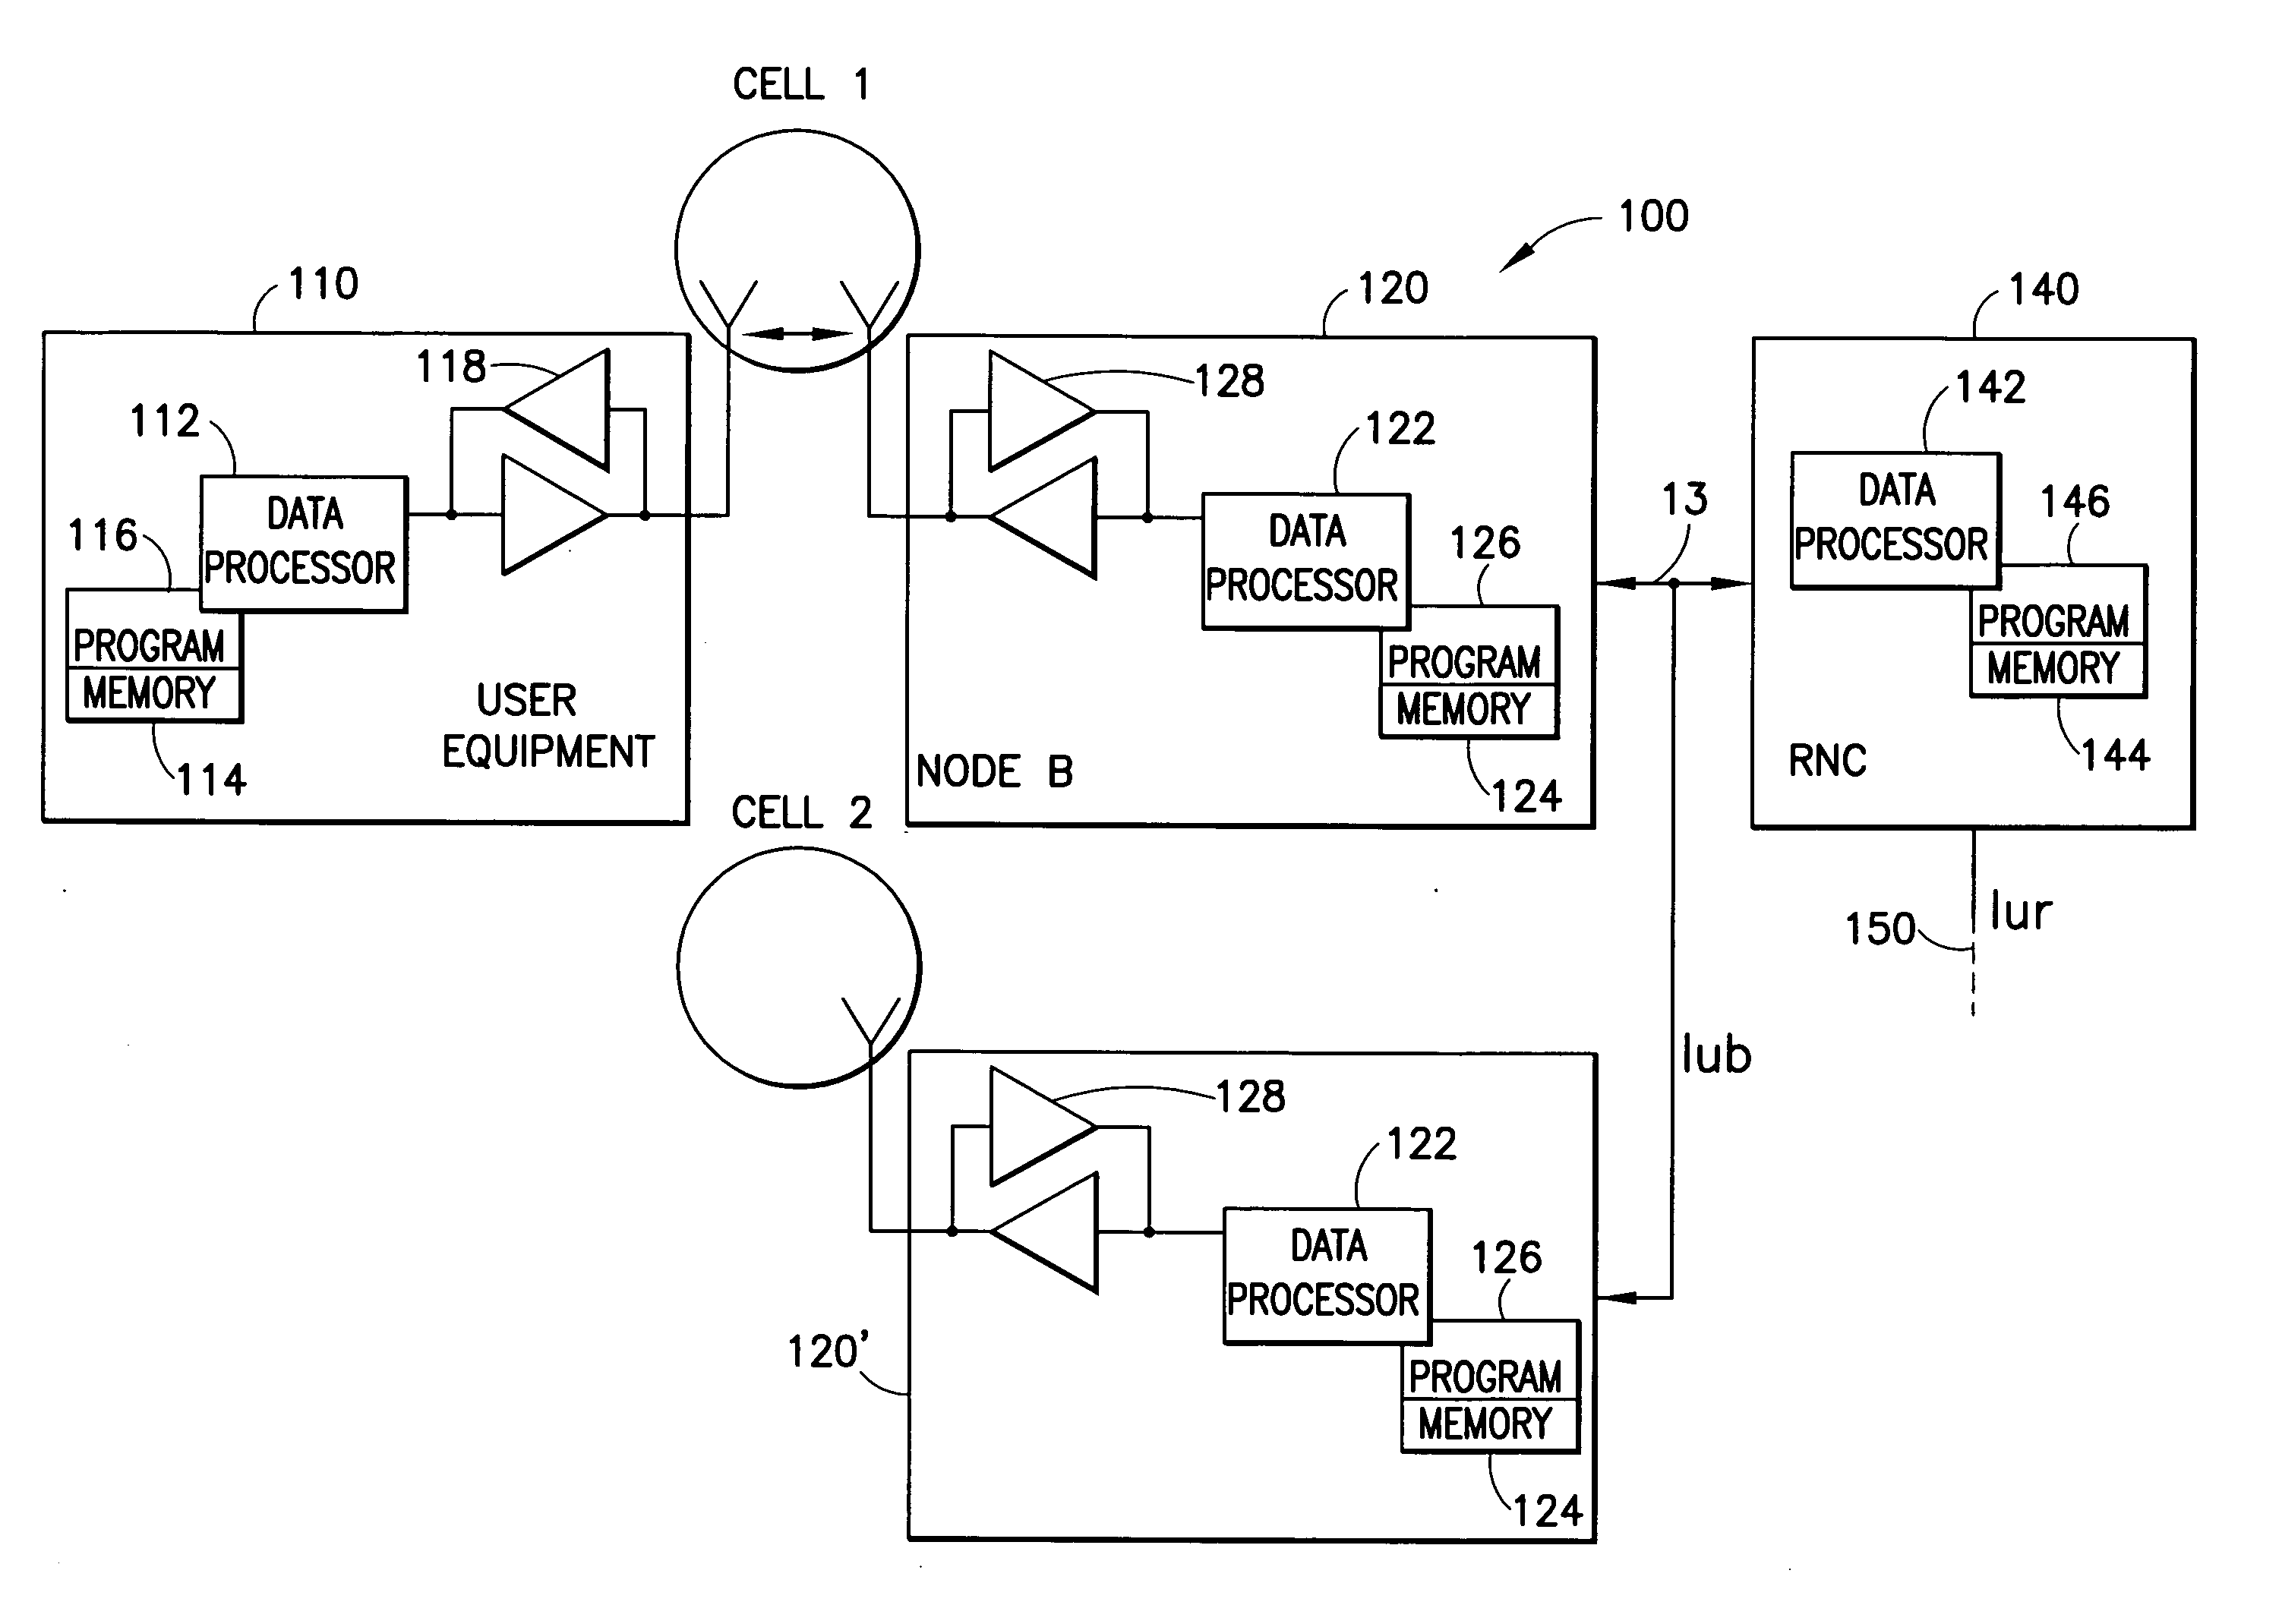 Apparatus, method and computer program product providing unified reactive and proactive handovers